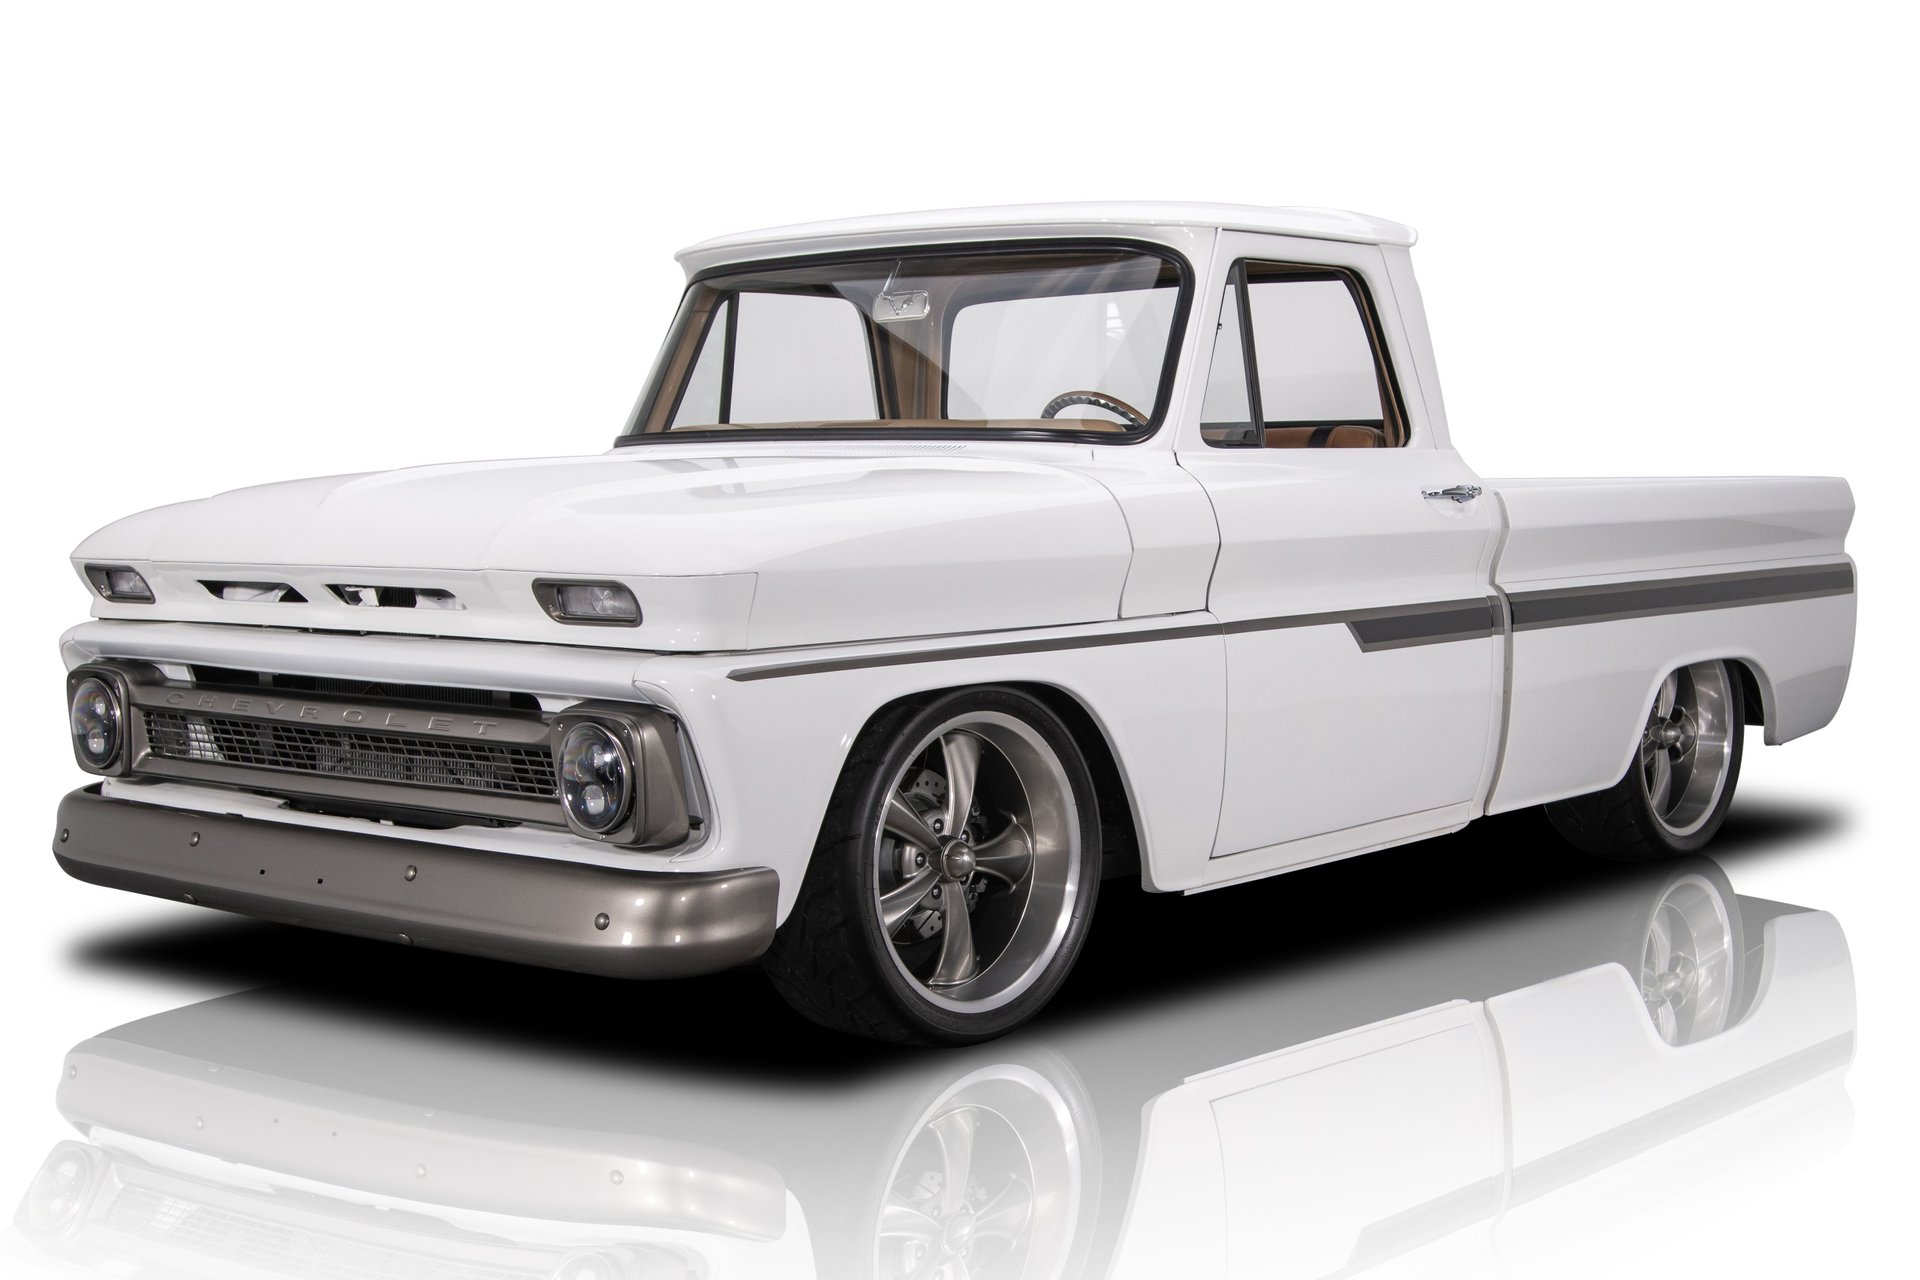 137190 1966 Chevrolet C10 RK Motors Classic Cars and Muscle Cars for Sale